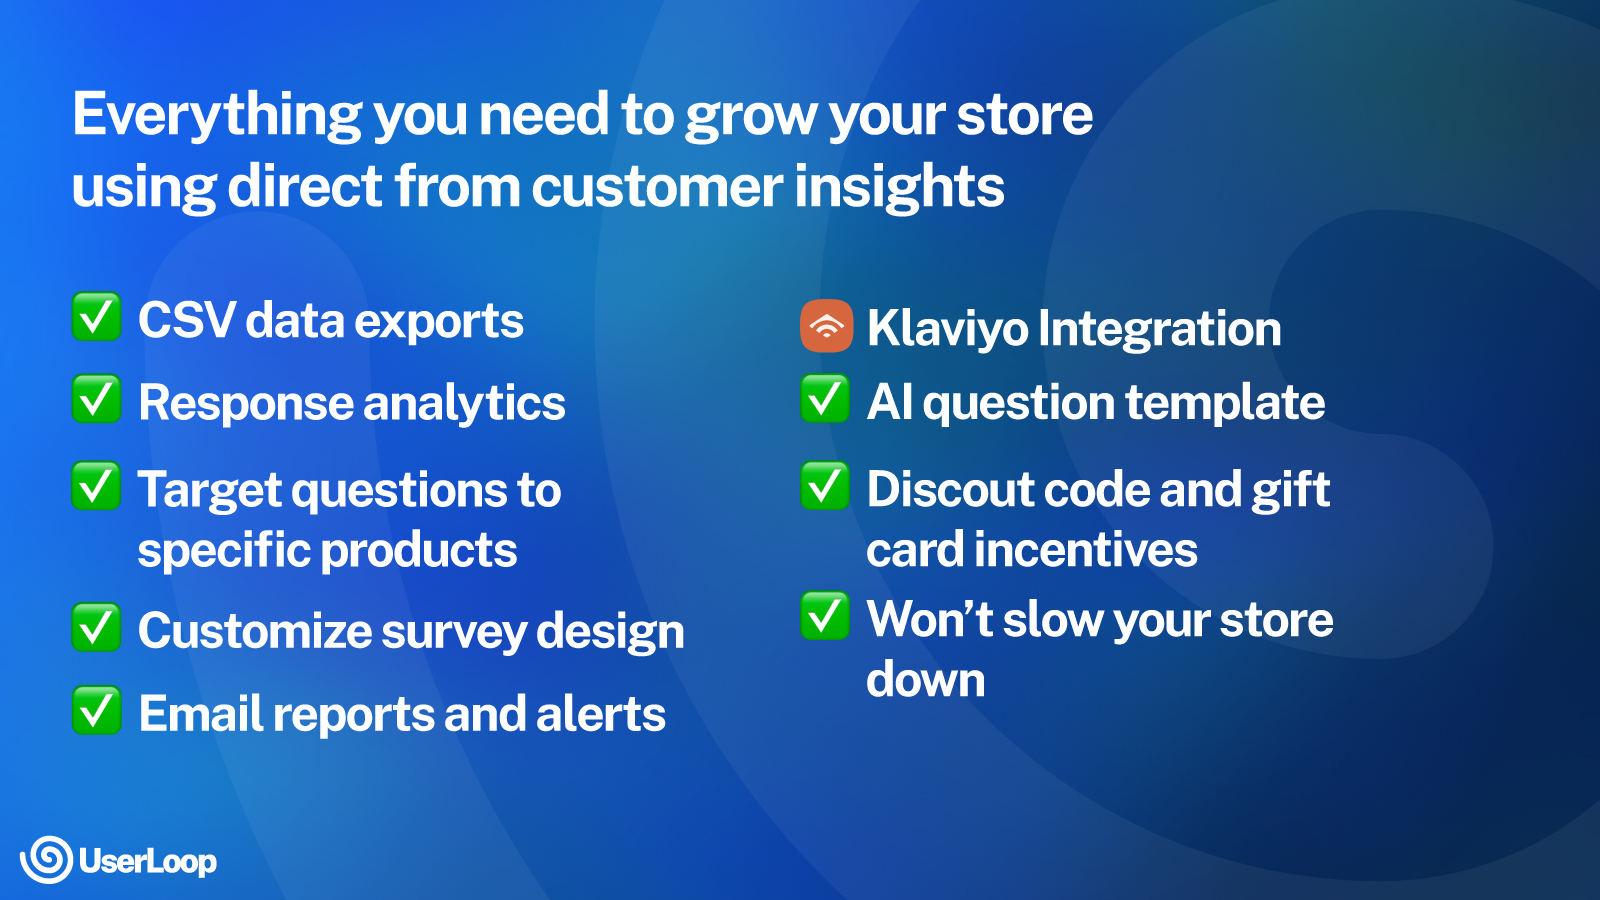 Everything you need to understand your customers + grow revenue